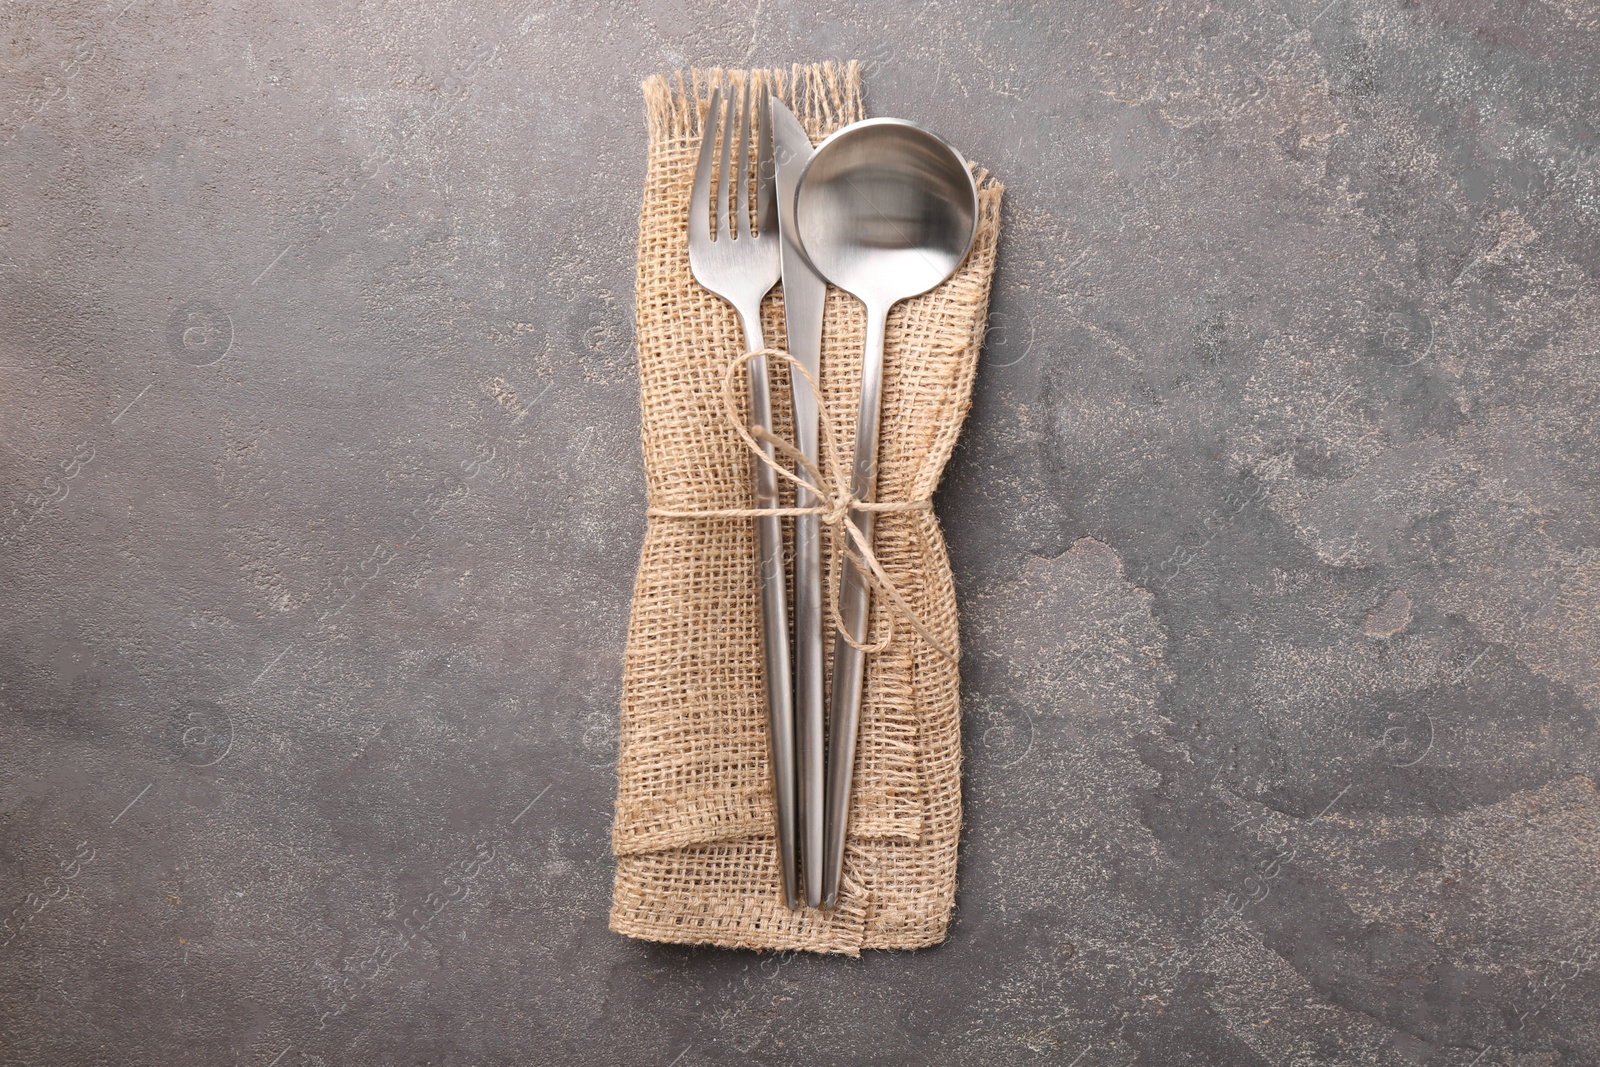 Photo of Set of stylish cutlery and napkin on grey textured table, top view